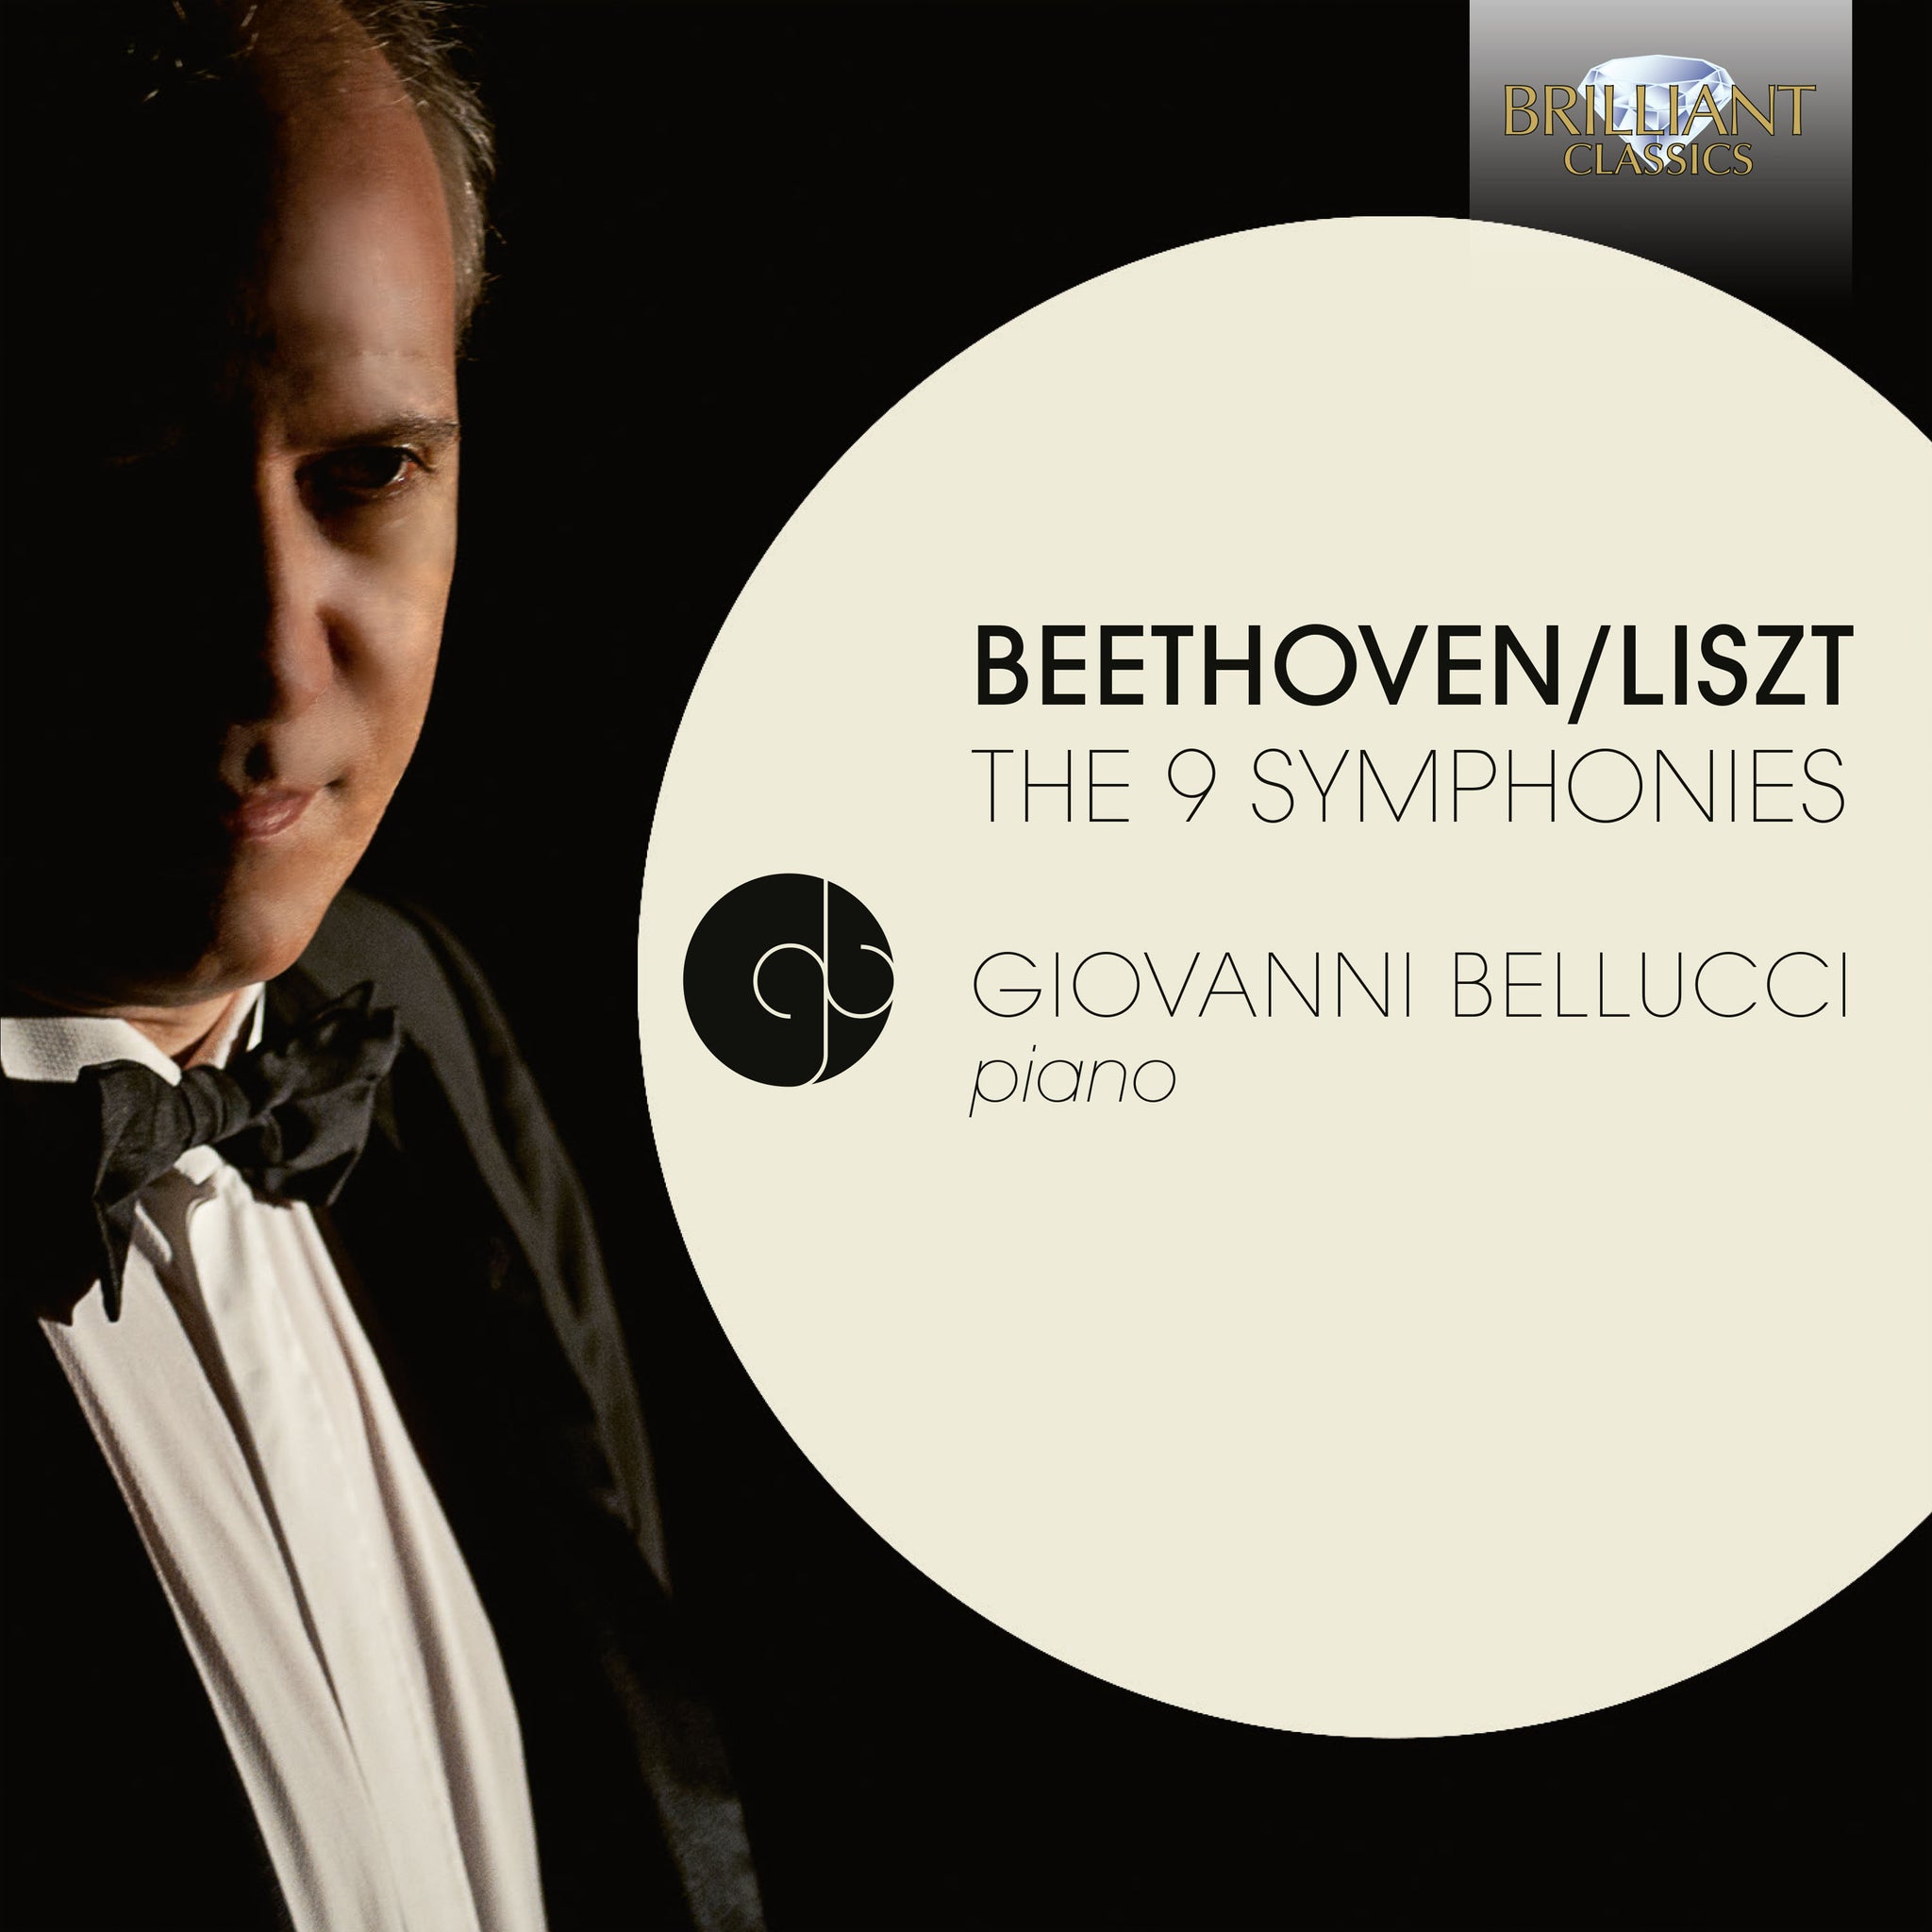 Beethoven-Liszt: The 9 Symphonies on Piano / Bellucci